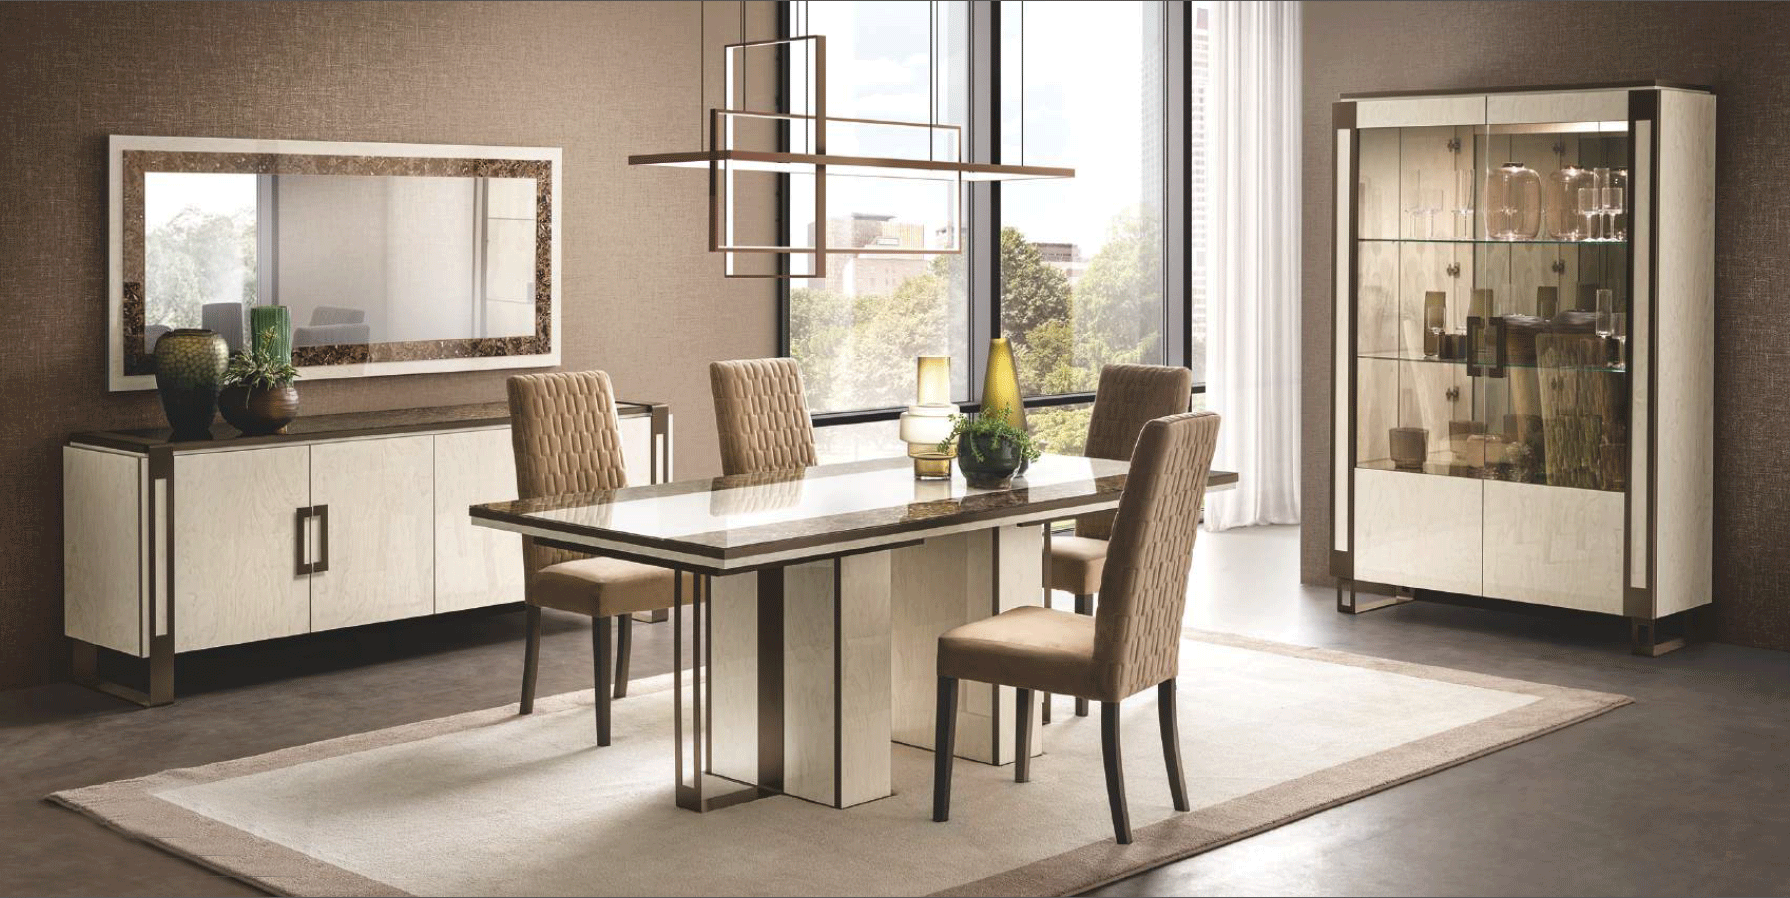 Brands Camel Classic Collection, Italy Poesia Dining room Additional items